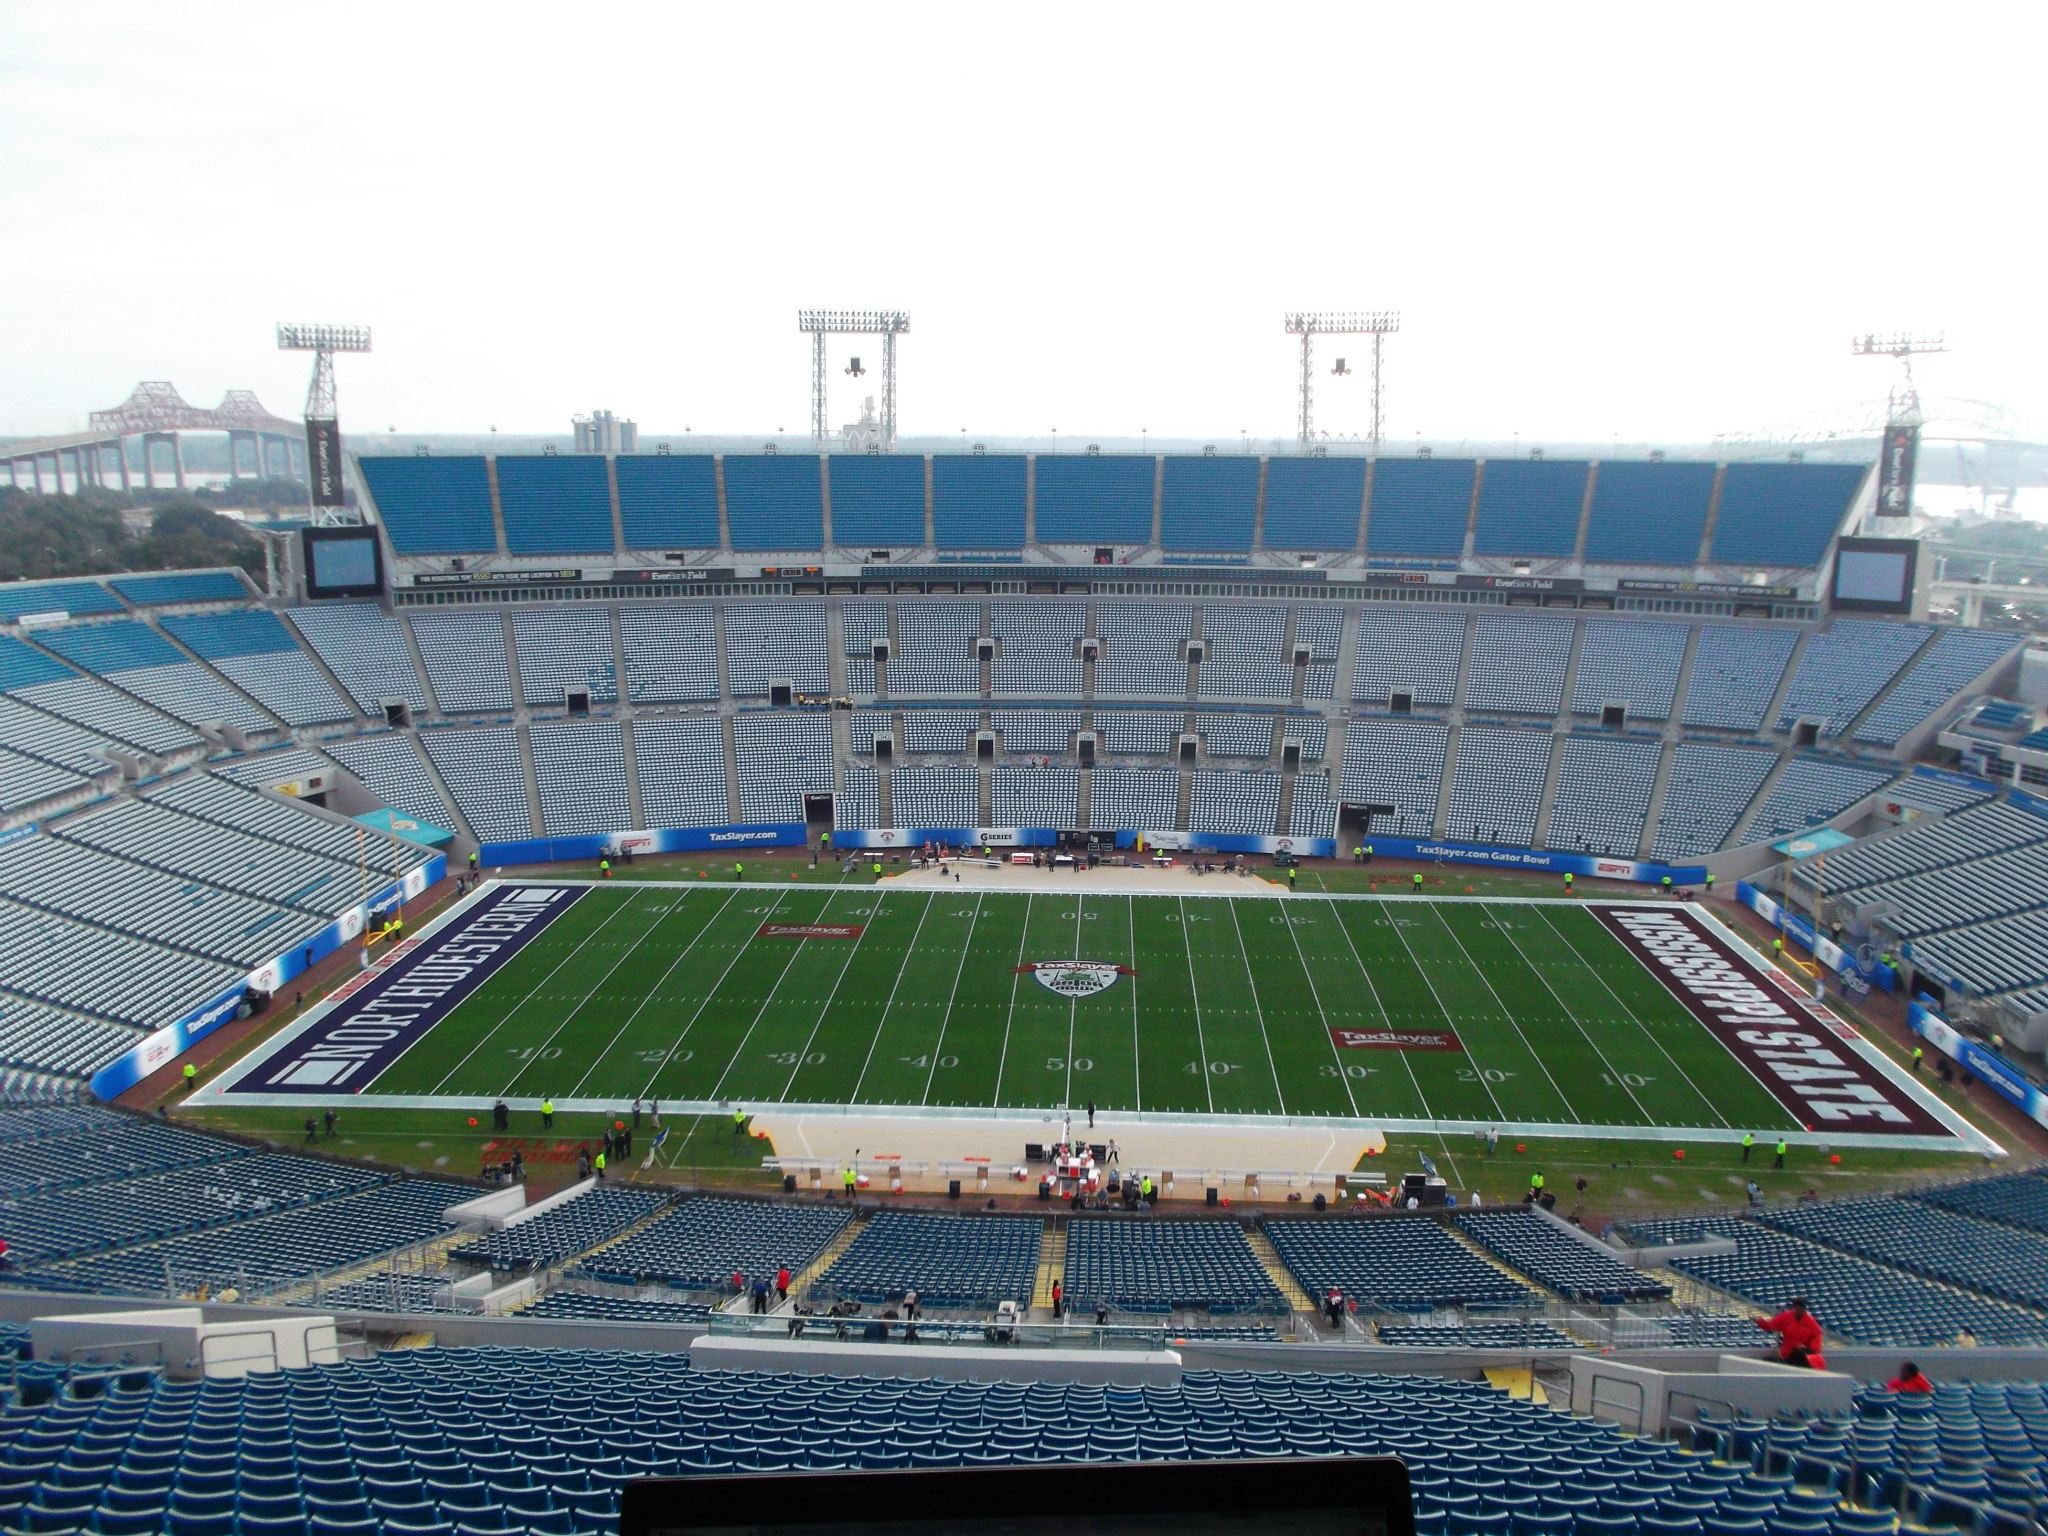 Photo from our press box in Jacksonville. I'm afraid of heights.